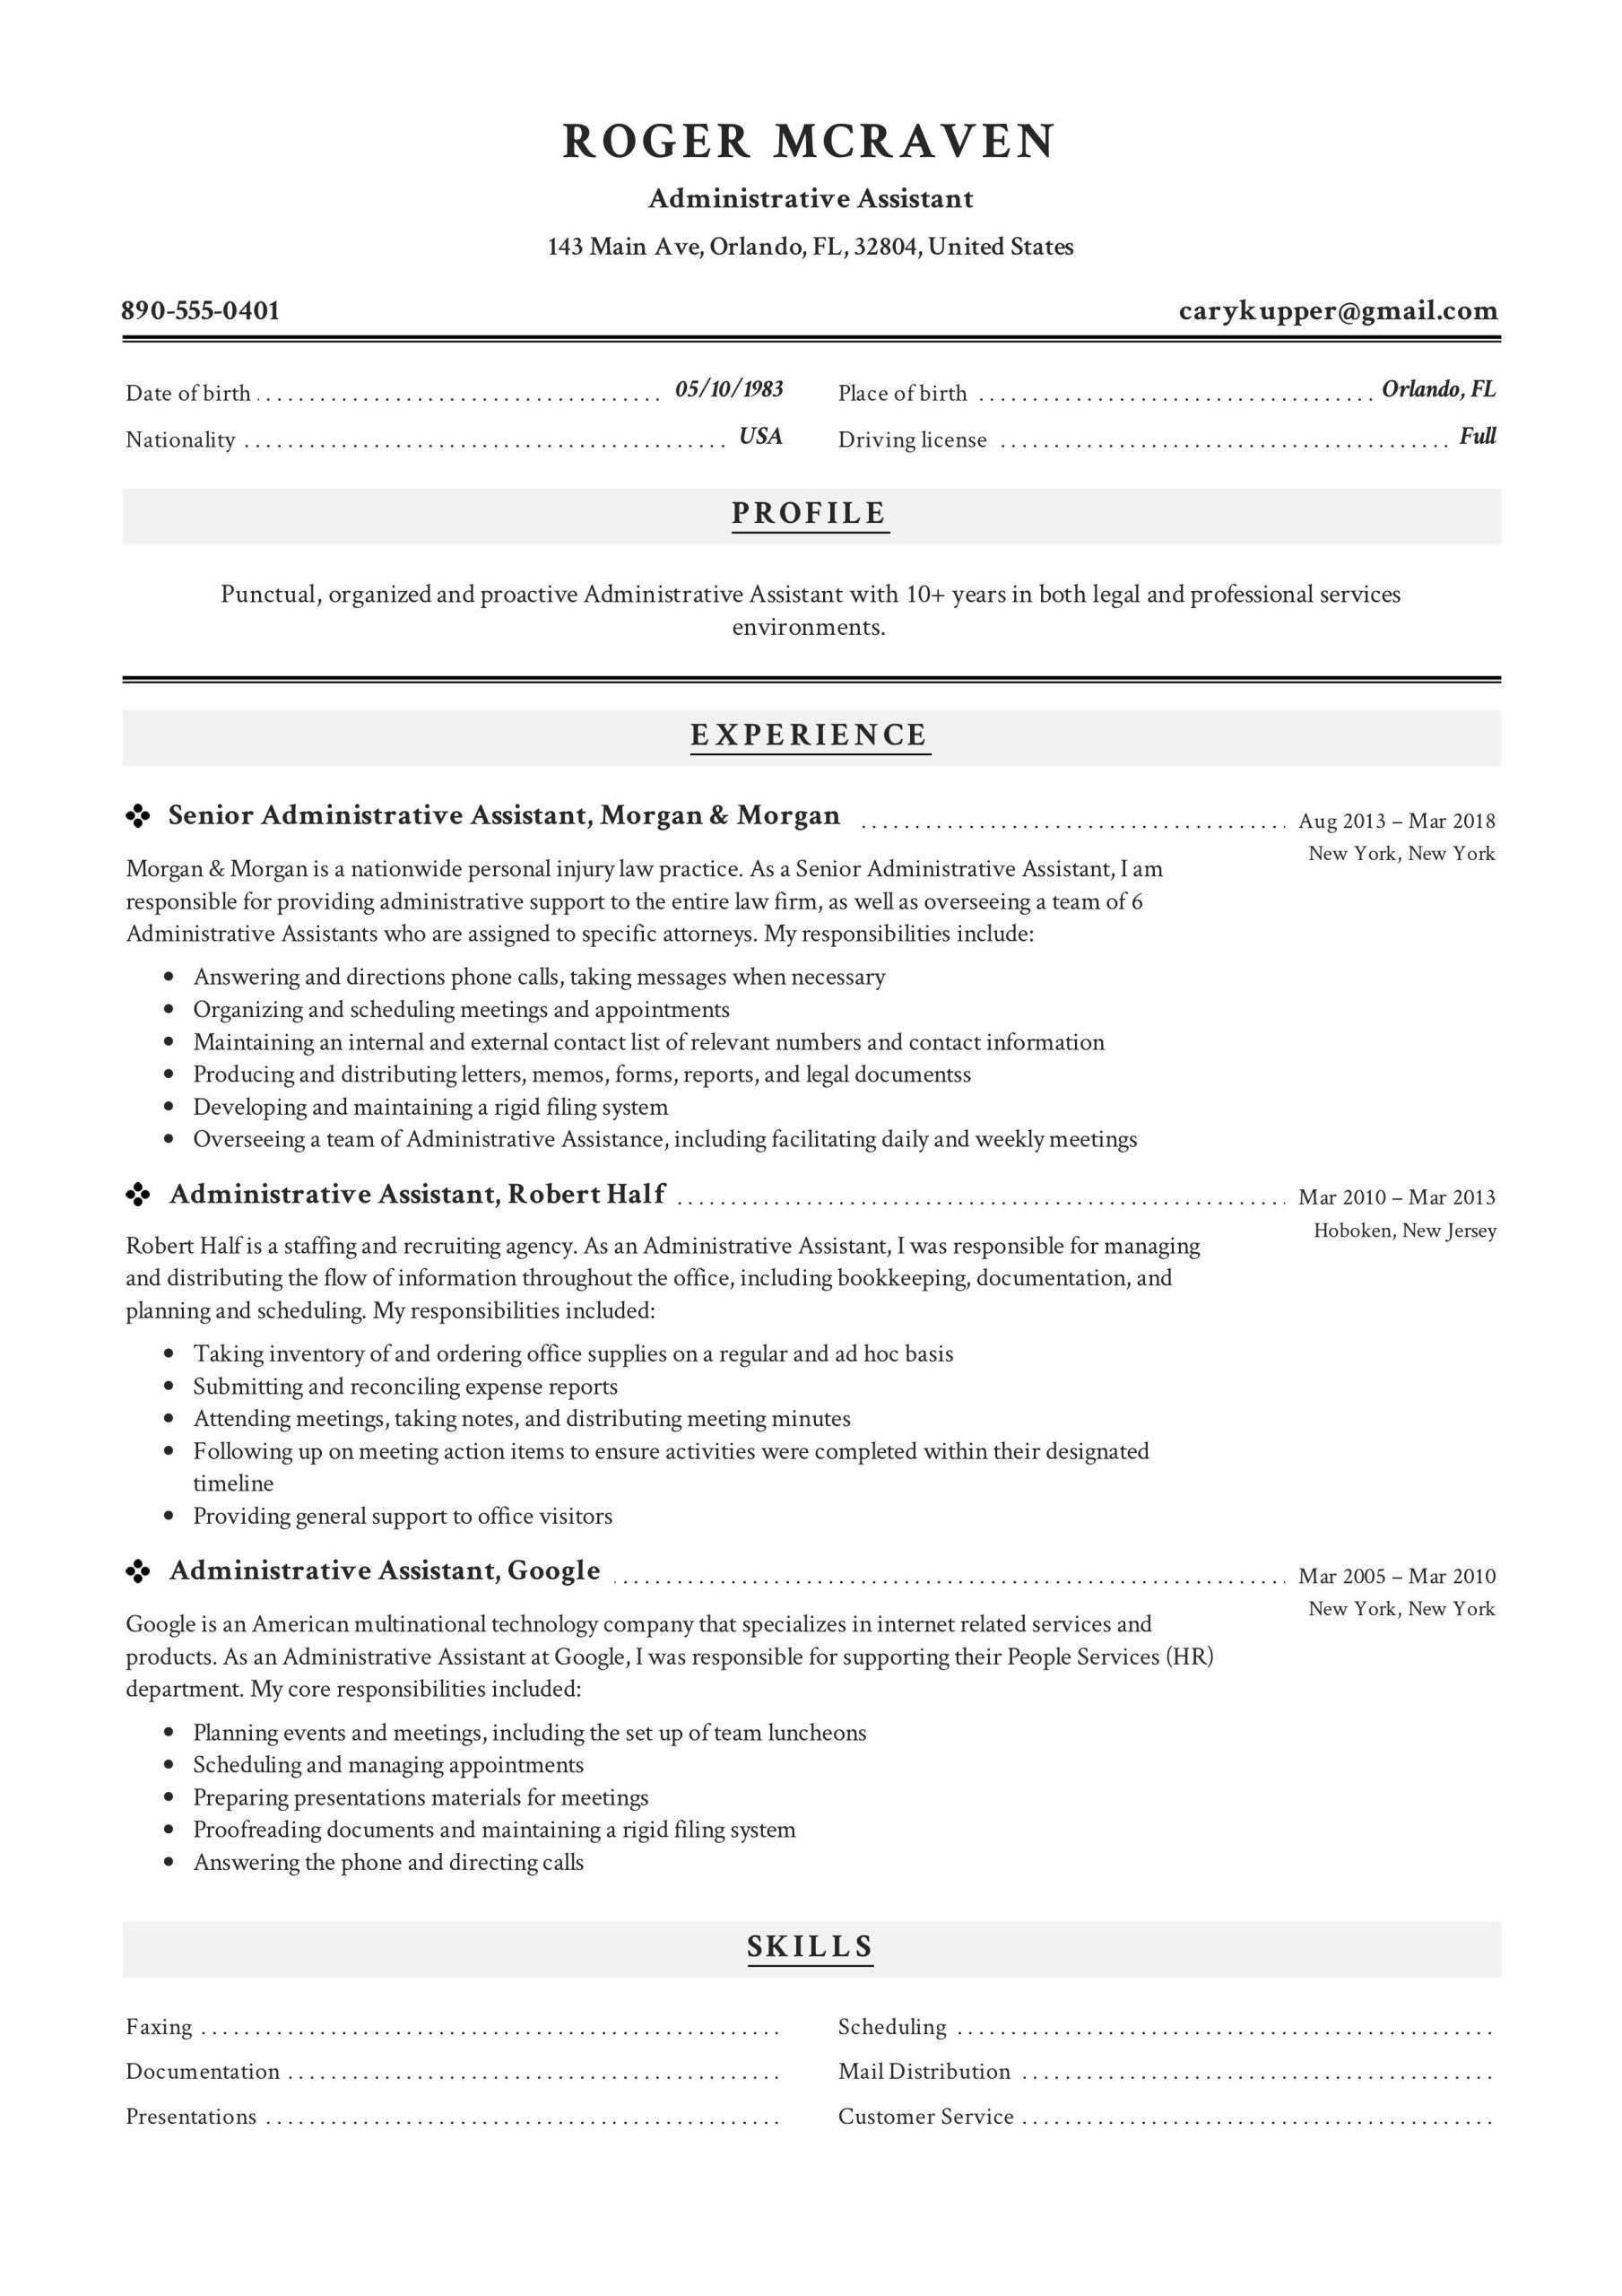 Sample Resume for Healthcare Administrative assistant Free Administrative assistant Resume Sample, Template, Example, Cv …